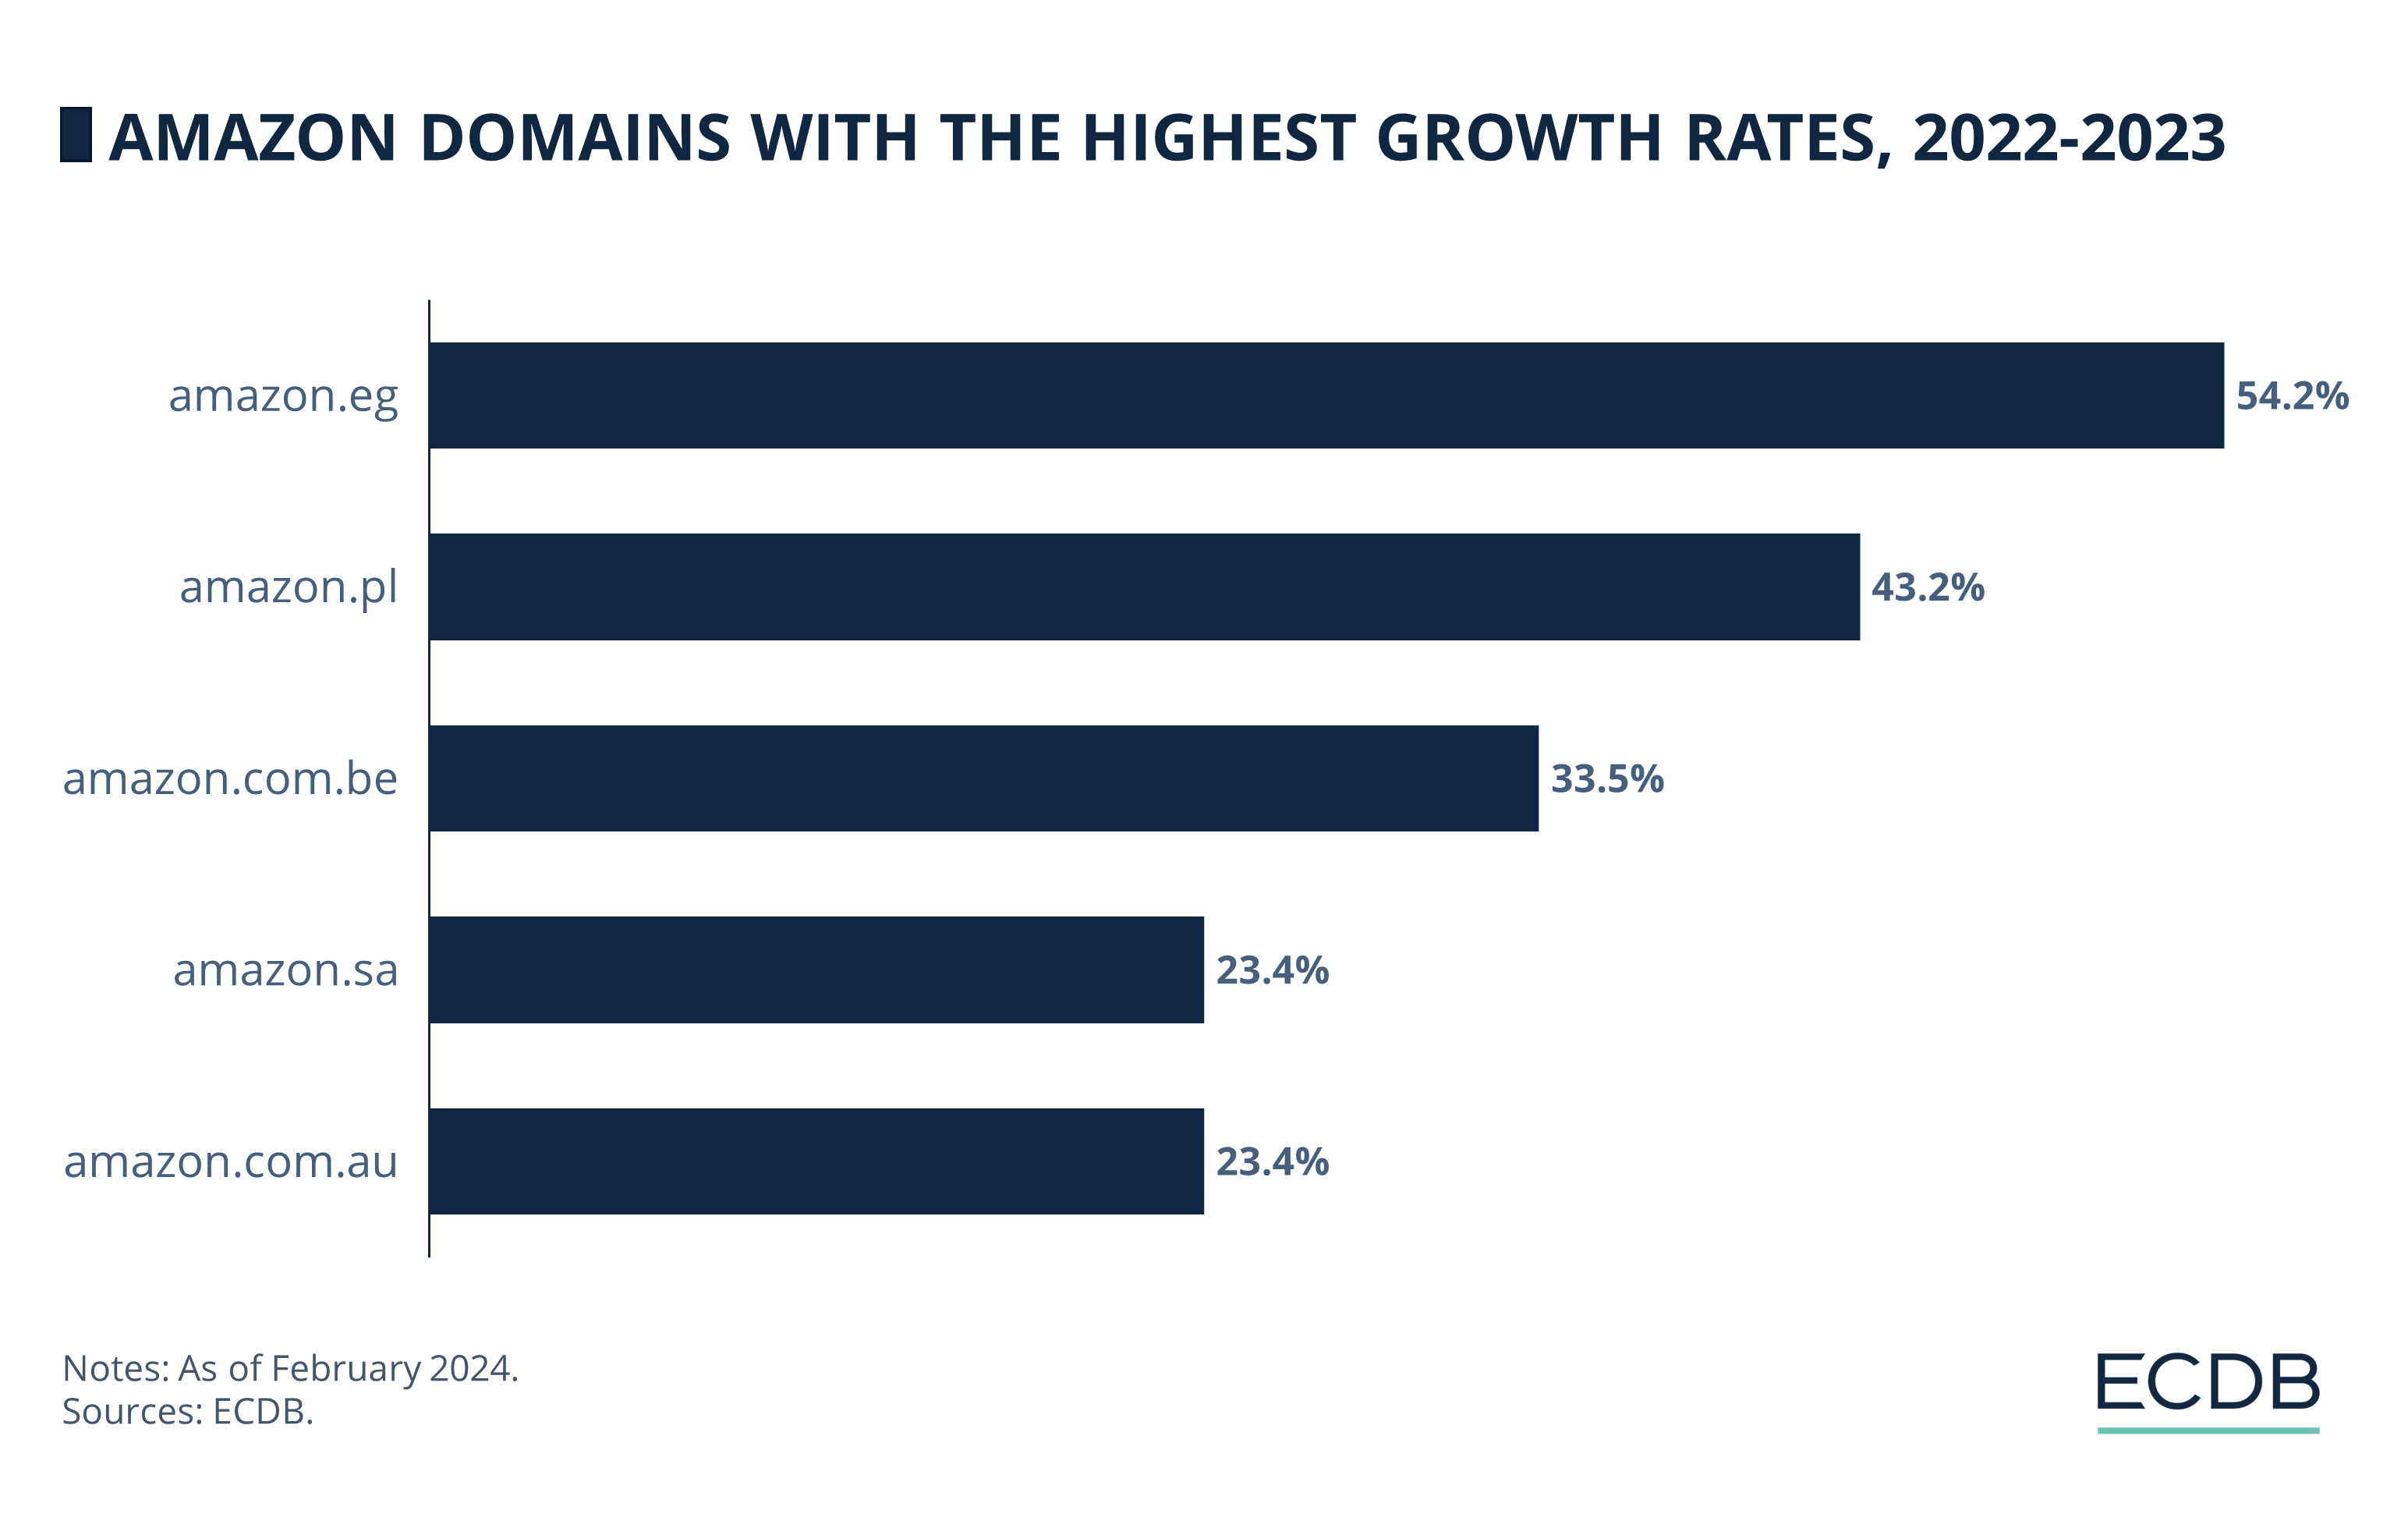 Amazon Domains with the Highest Growth Rates, 2022-2023